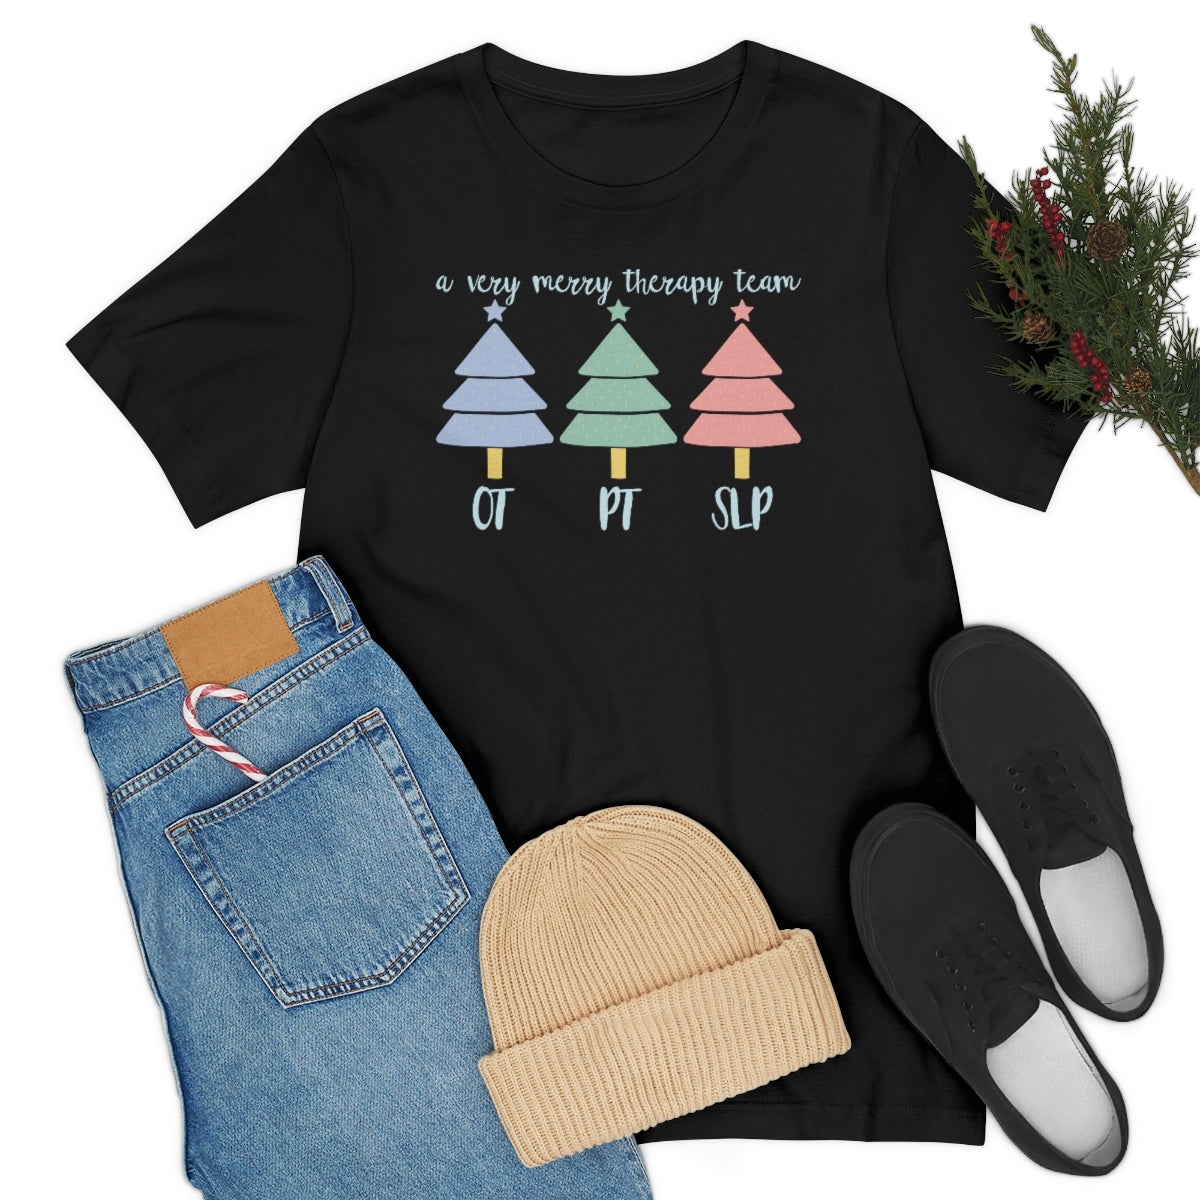 A Very Merry Therapy Team OT PT SLP Christmas Shirt Black Color